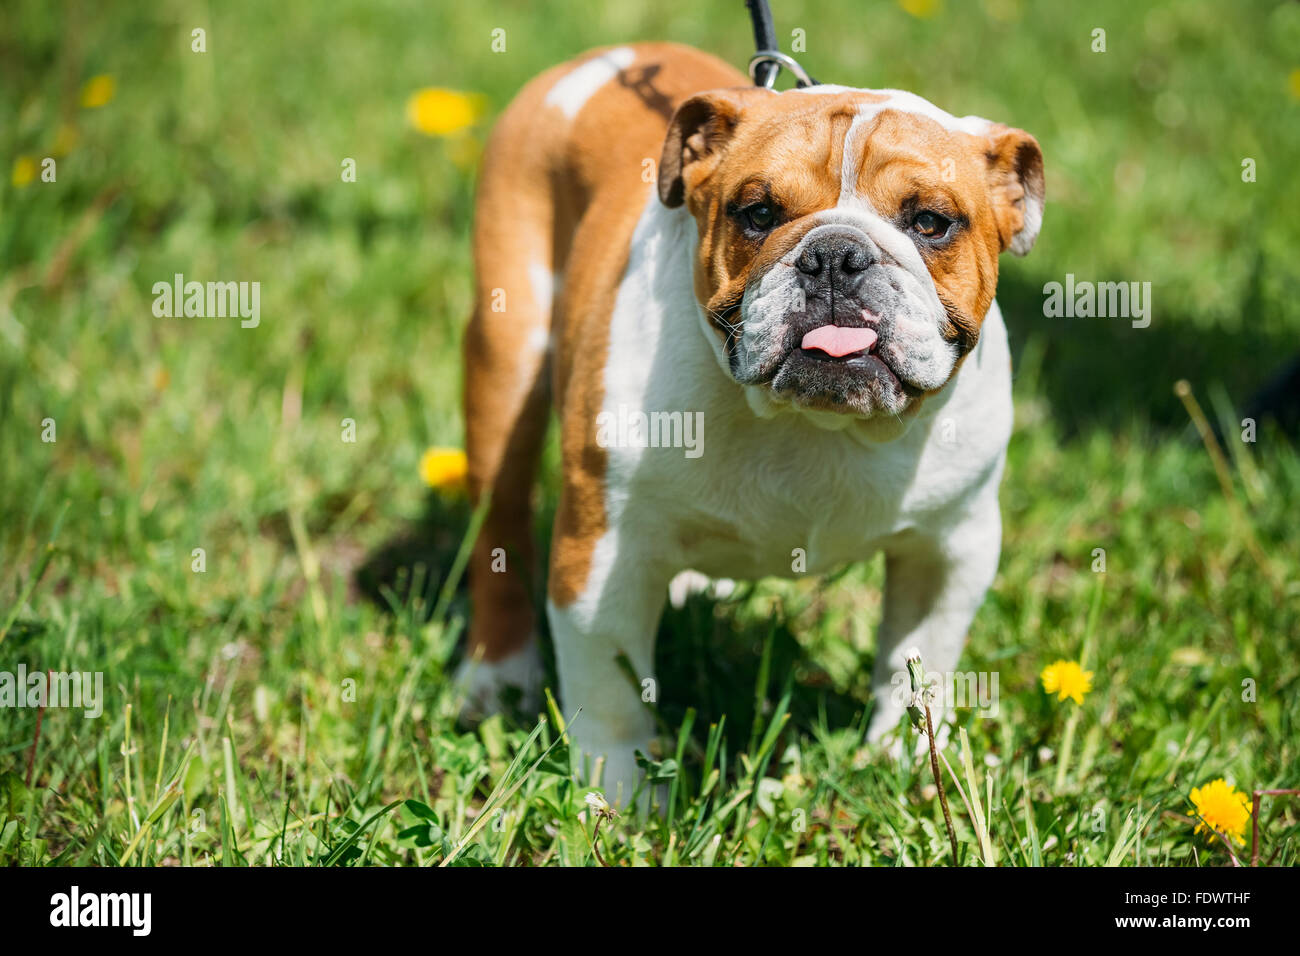 White and Red English Bulldog Dog In Green Grass in Park Outdoor Stock Photo